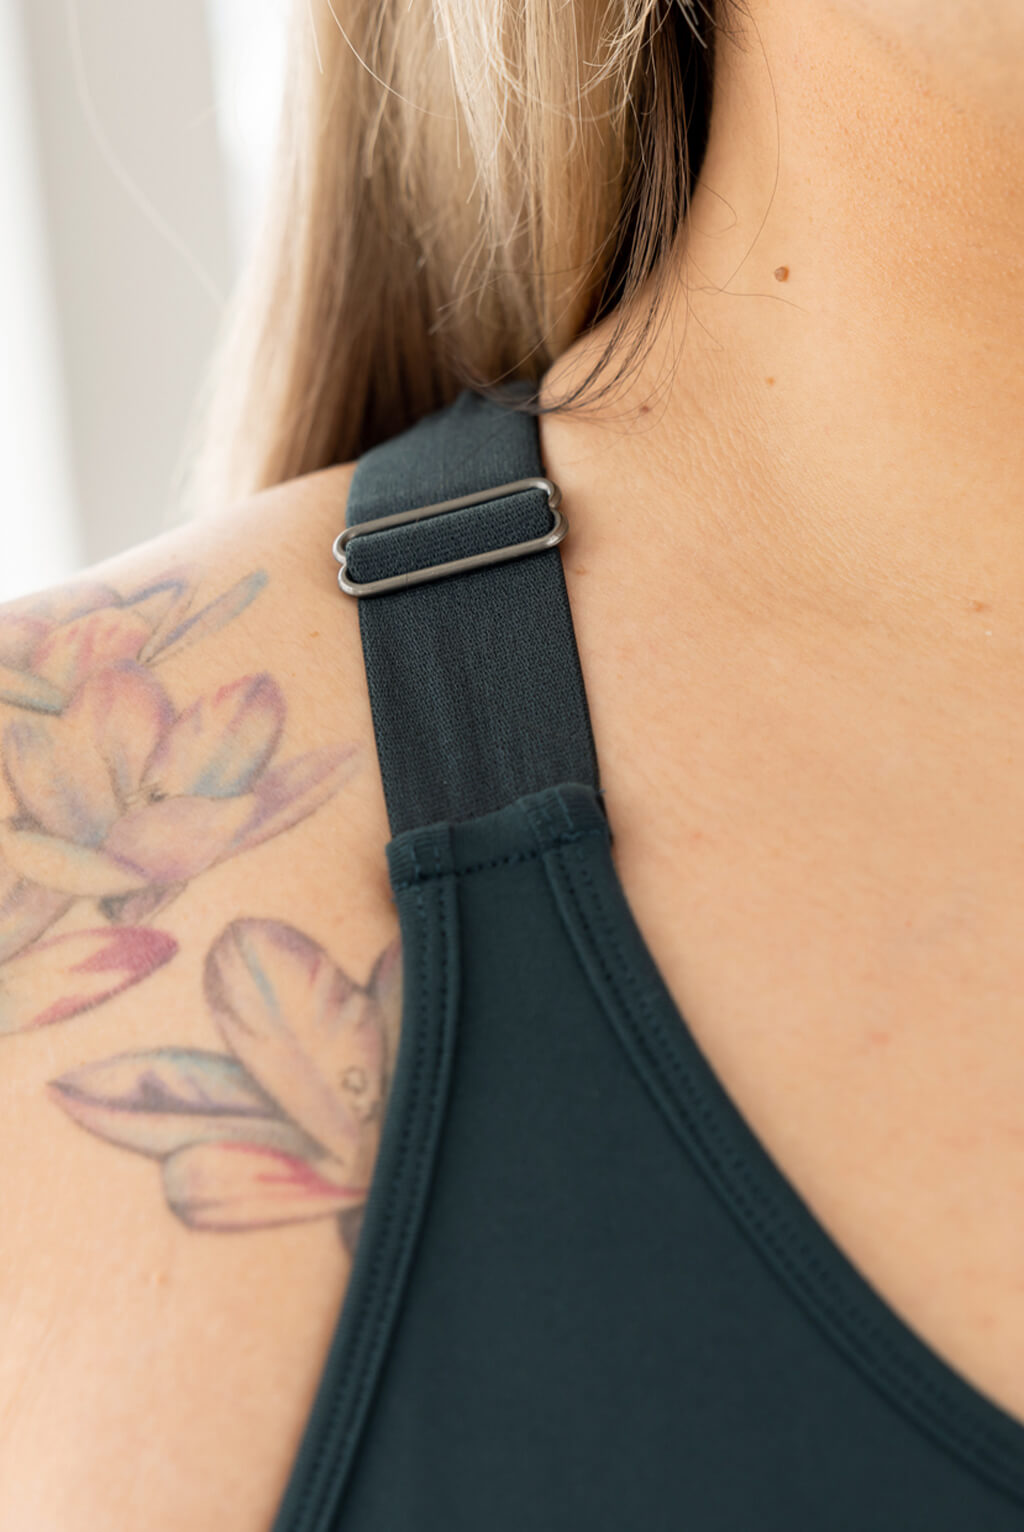 Details of the new style Zip Front Sports Bra in Evergreen launched by Superfit Hero.